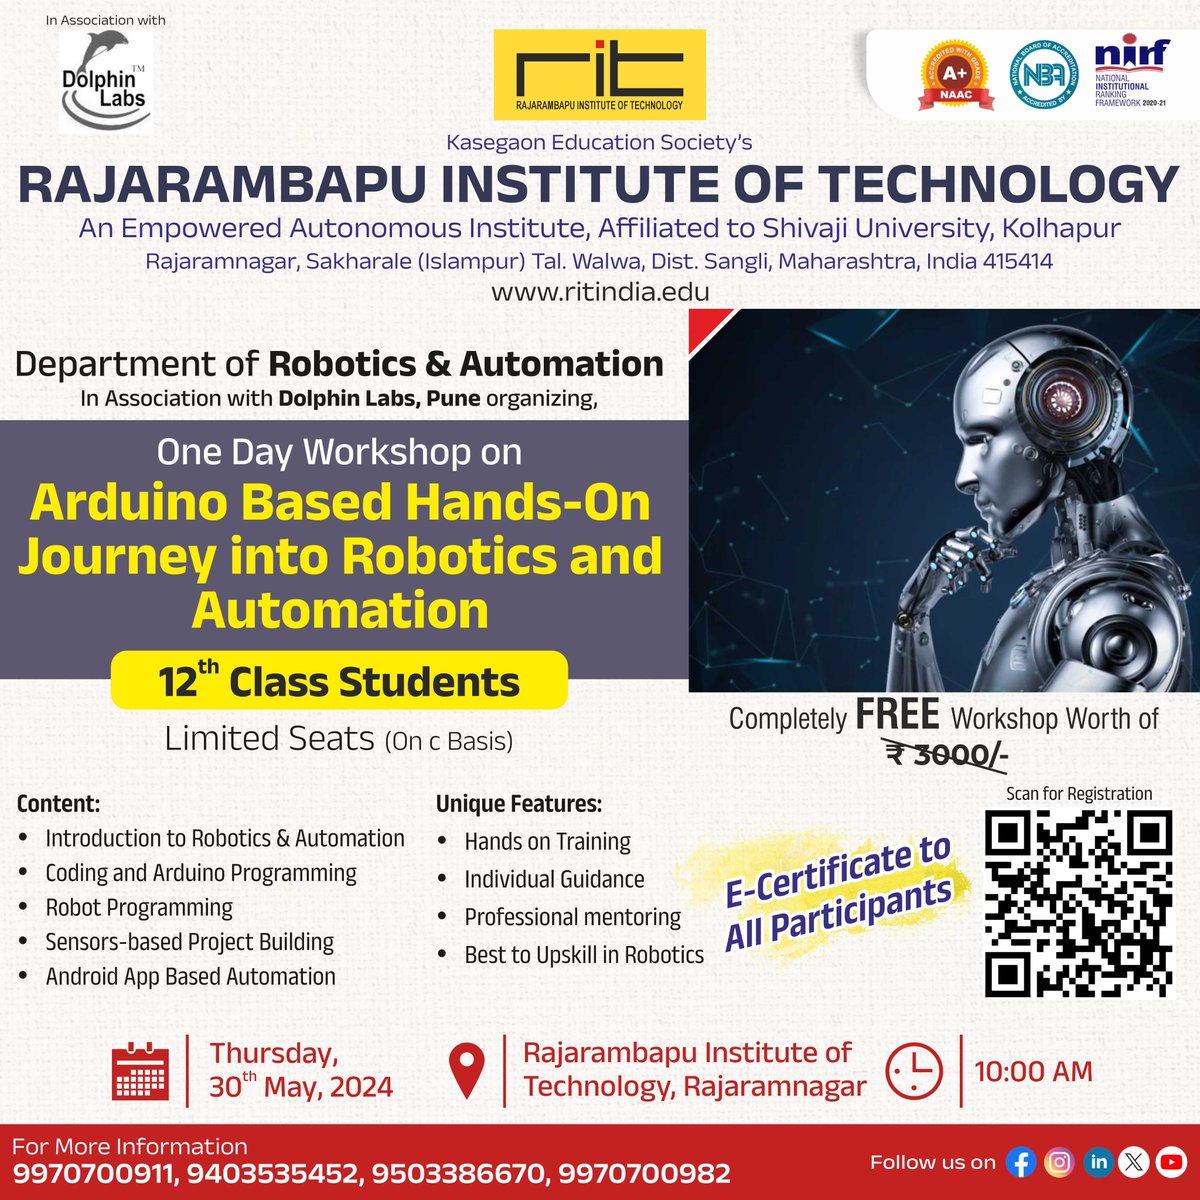 🚀 Join our One Day Workshop on Arduino Based Hands-On Journey into Robotics and Automation ! 🚀
Registration Link: forms.gle/SsgKDS1s2fyxVG…
#ArduinoWorkshop #Robotics #Automation #HandsOnLearning #Innovation #TechEnthusiast #STEMEducation